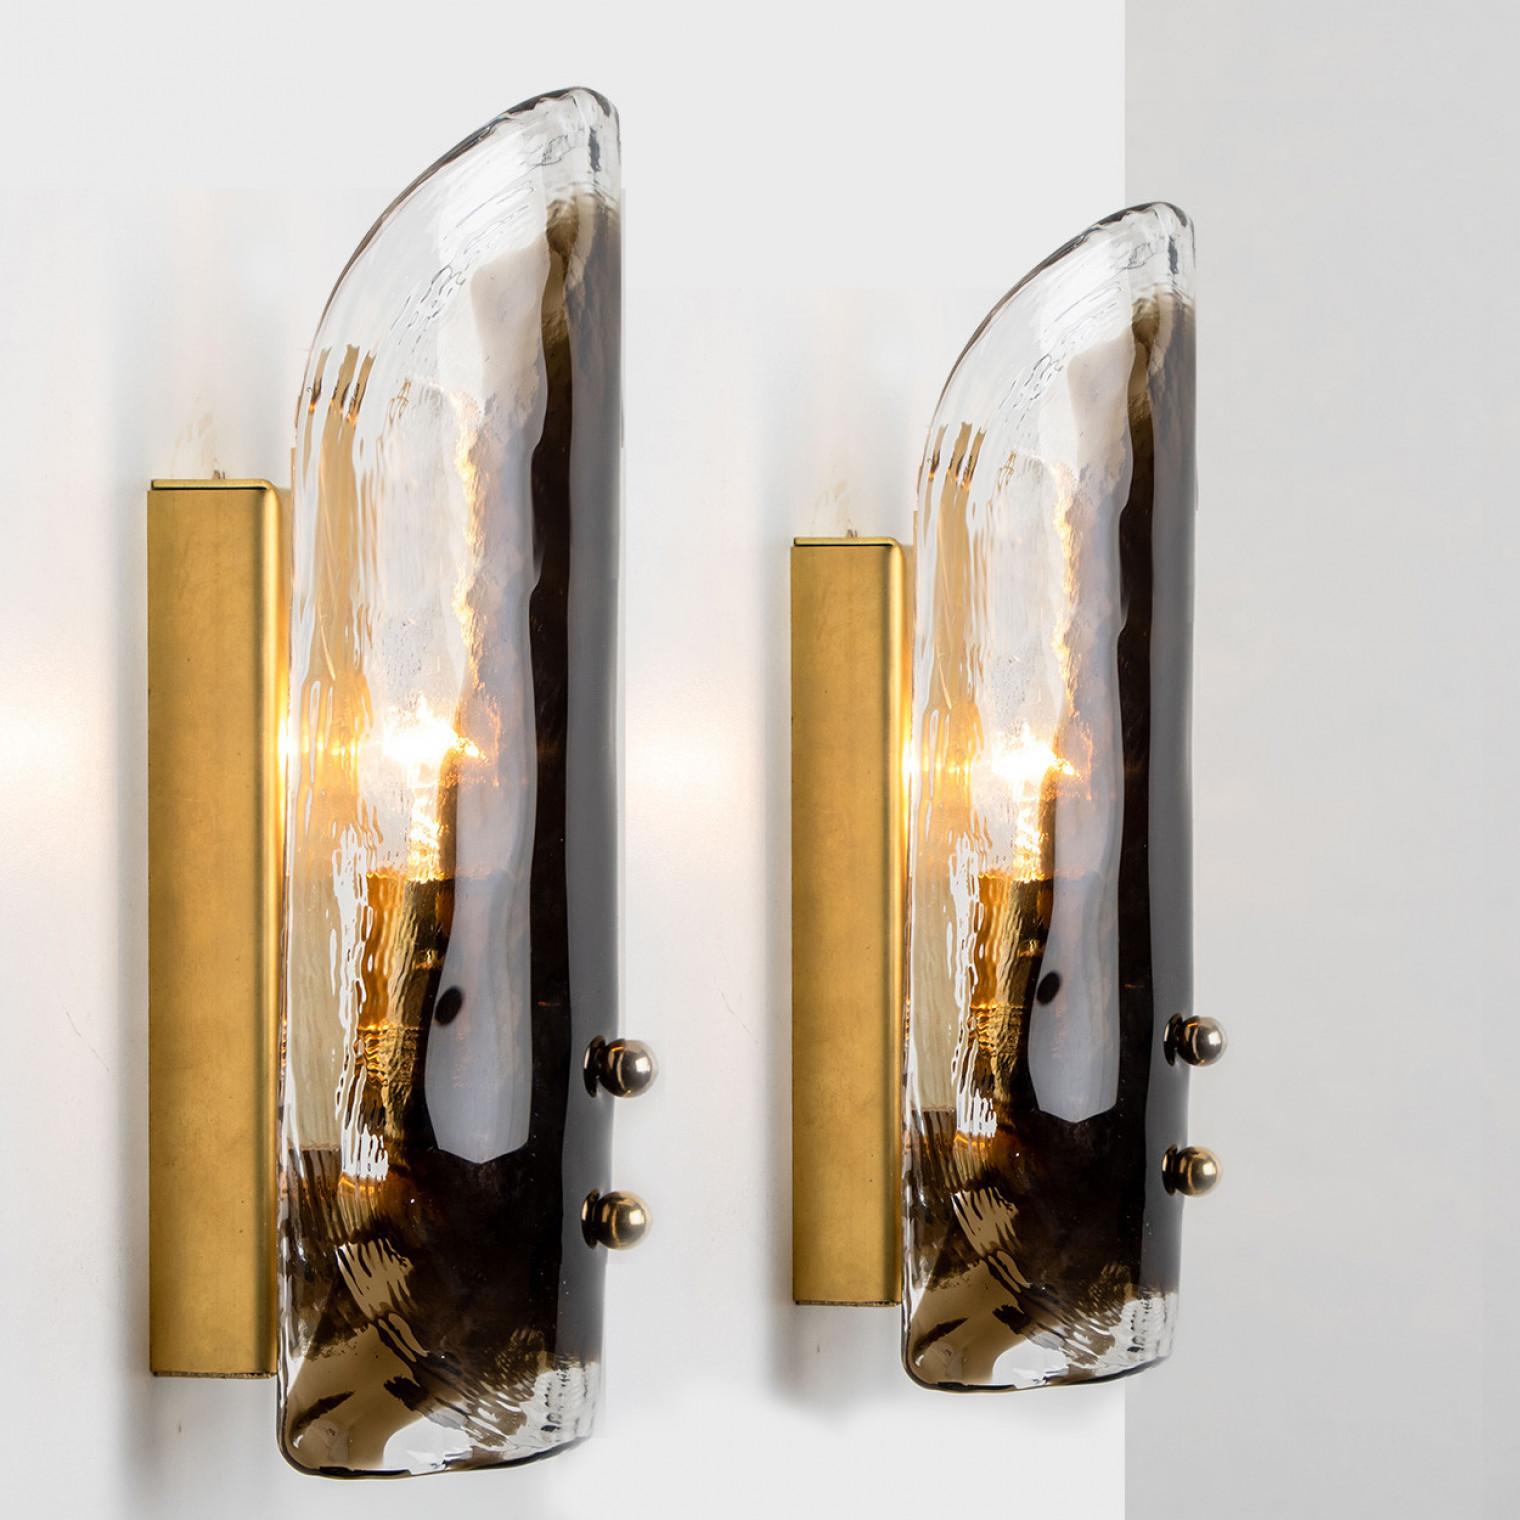 High-end wall sconces made of blown clear and opal Murano glass on a brass hardware. Designed and produced by J.T. Kalmar, Austria in the 1960s. Minimalistic design executed with a taste for excellence in craftsmanship. These are real statement